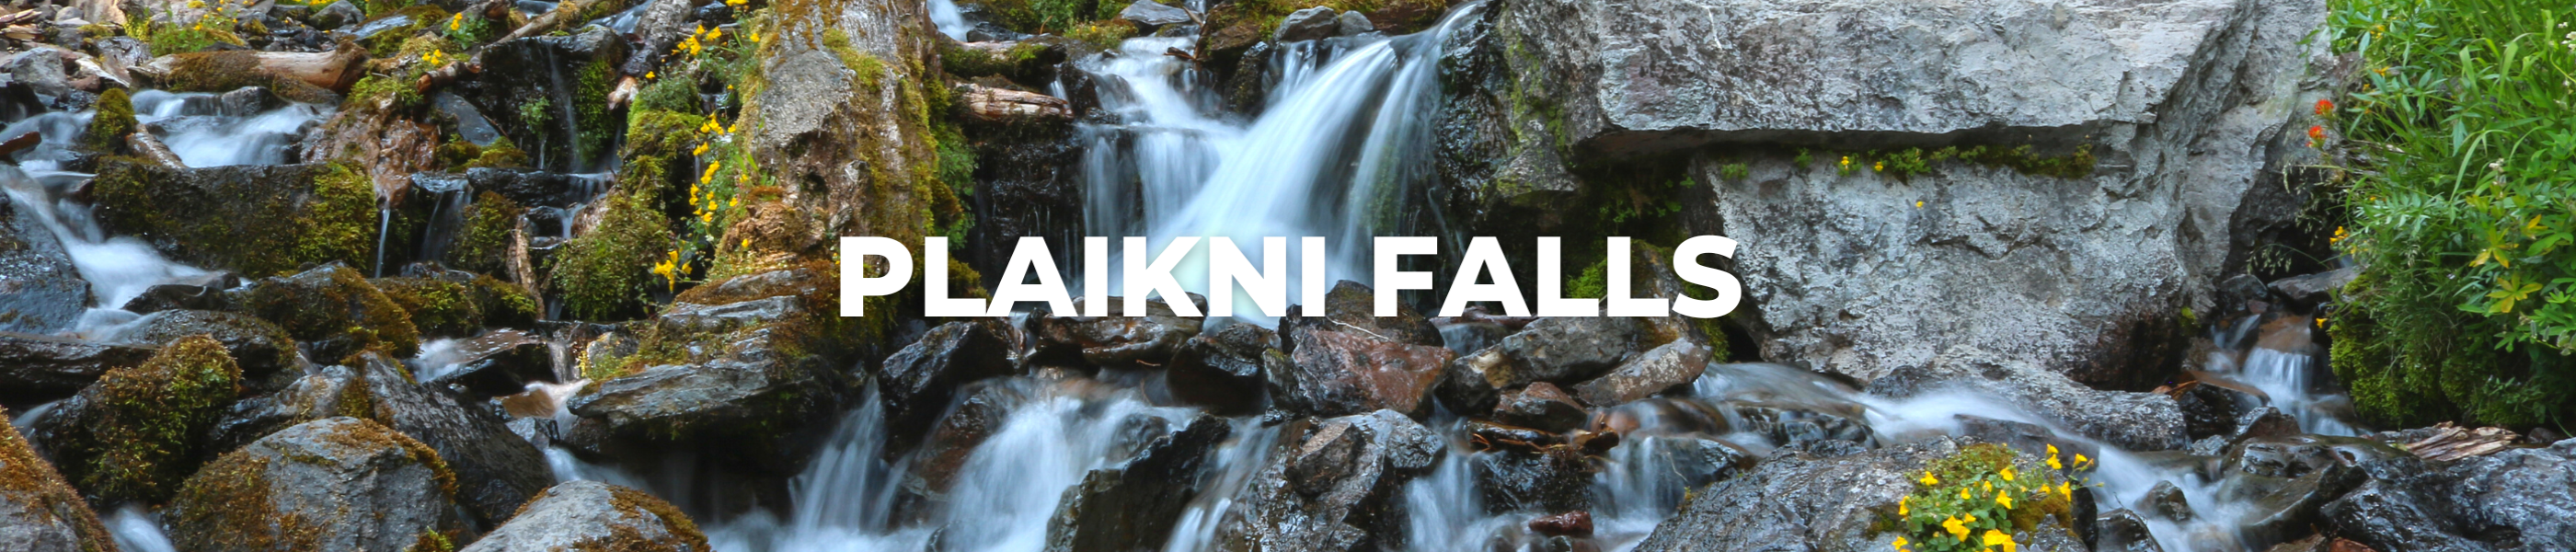 Plaikni Falls in Crater Lake National Park, Oregon, USA, things to do, rim spots at crater lake, outdoor adventure, favorite trails